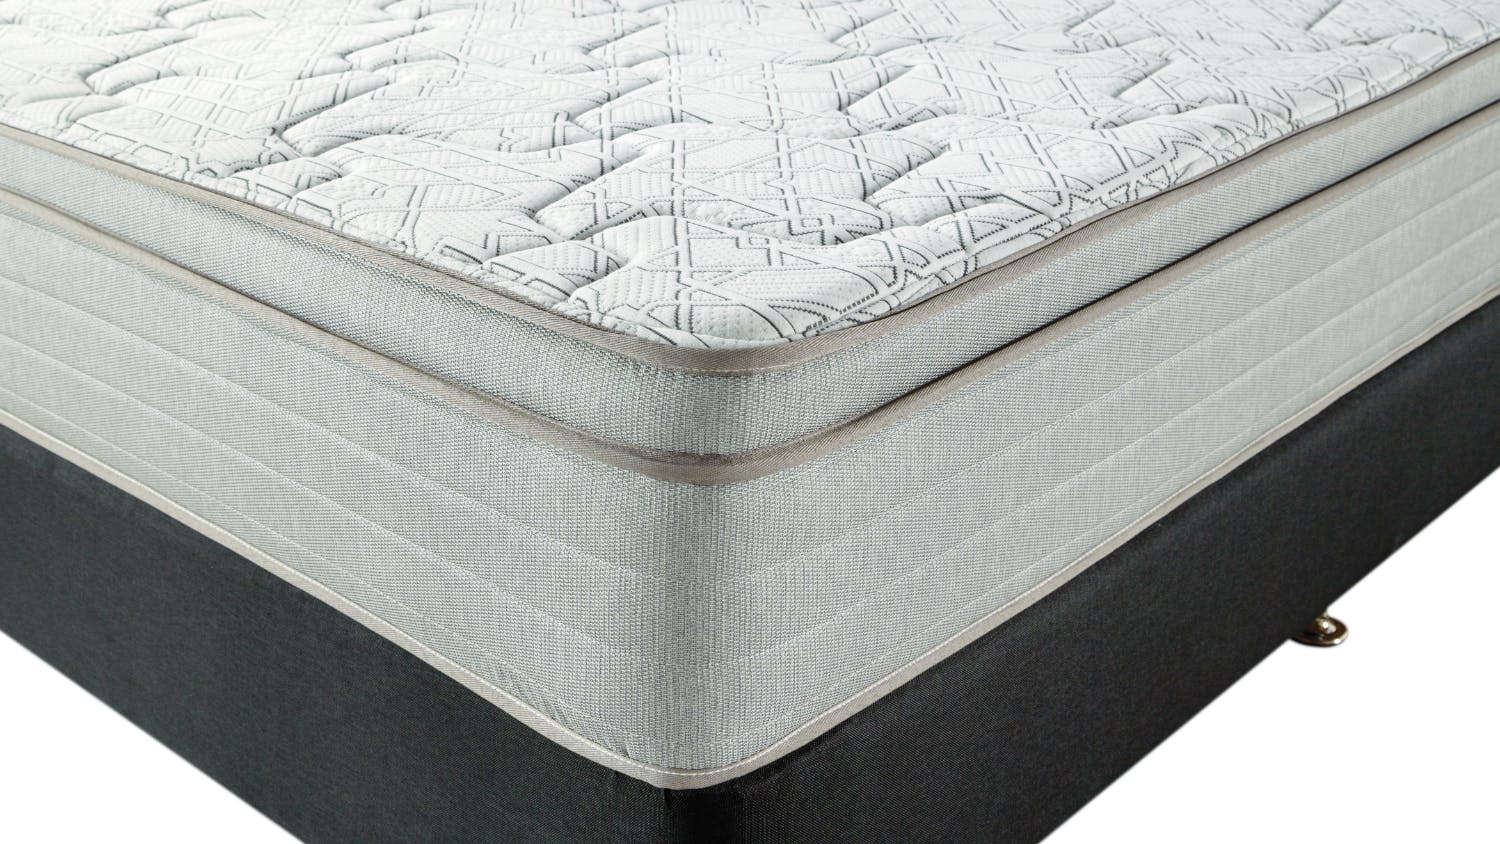 King Koil Conforma Classic II Medium Queen Mattress with Conforma Base by A.H Beard